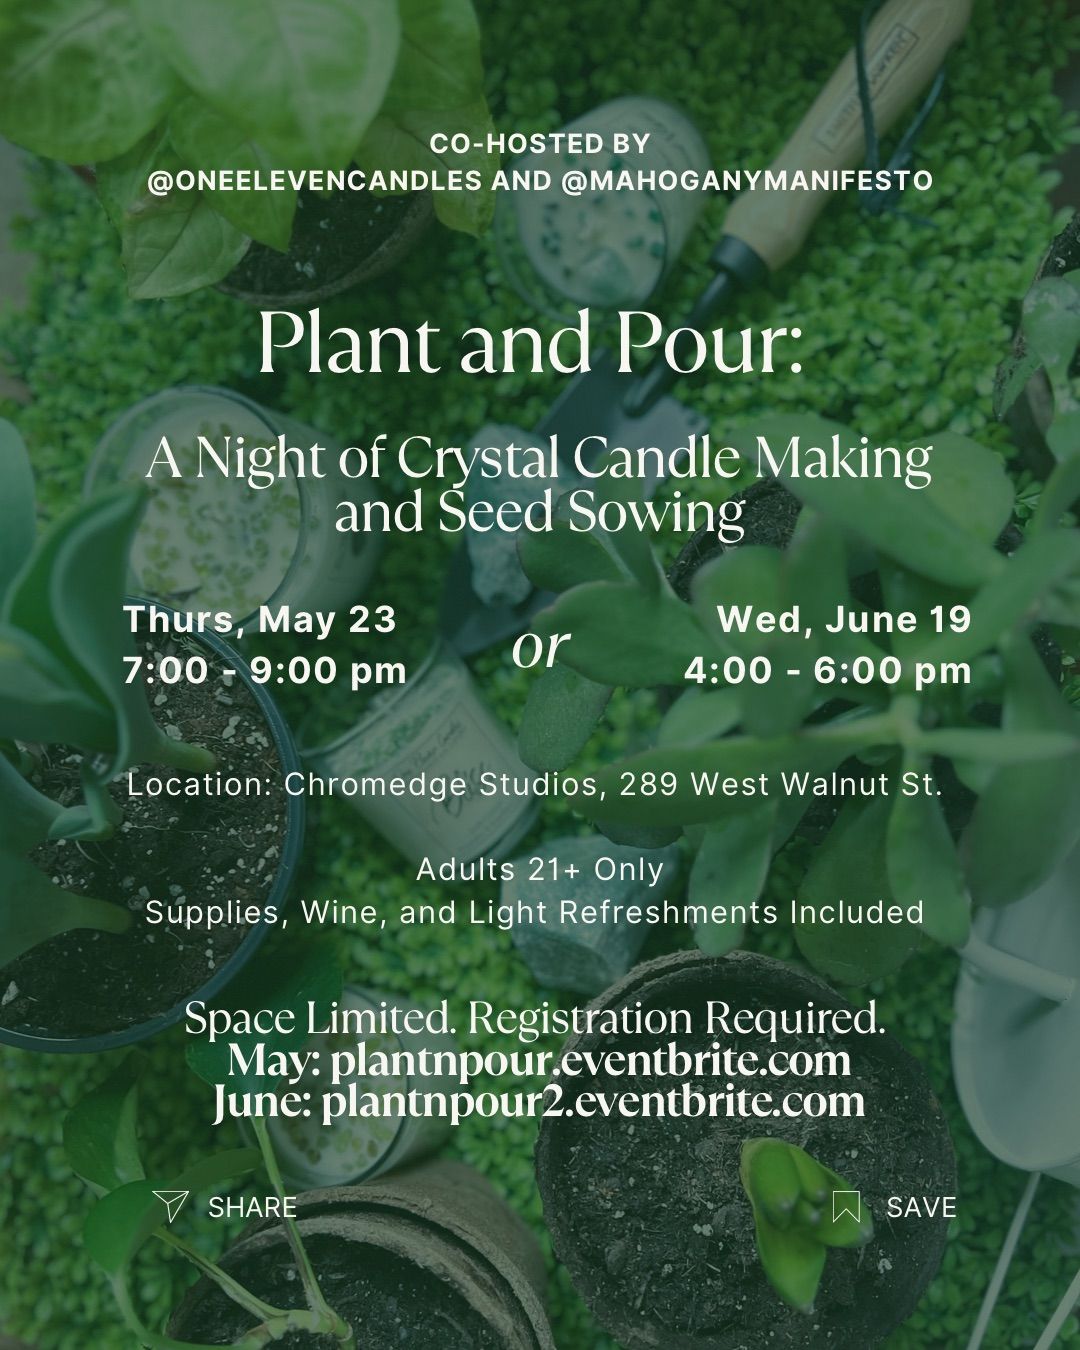 Plant and Pour: A Night of Crystal Candle Making and Seed Sowing